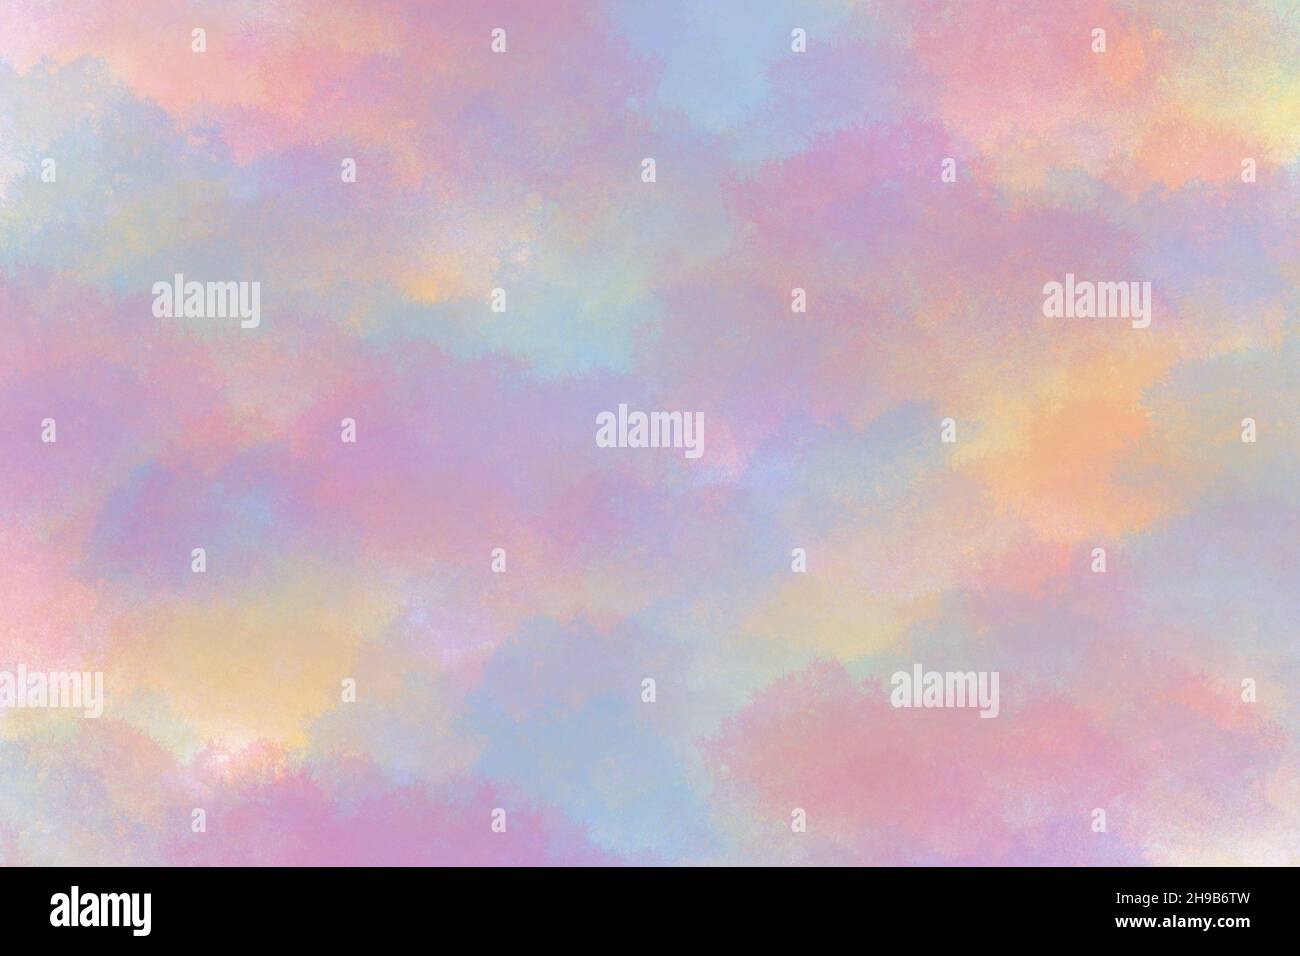 Abstract modern pink yellow blue background. Tie dye pattern